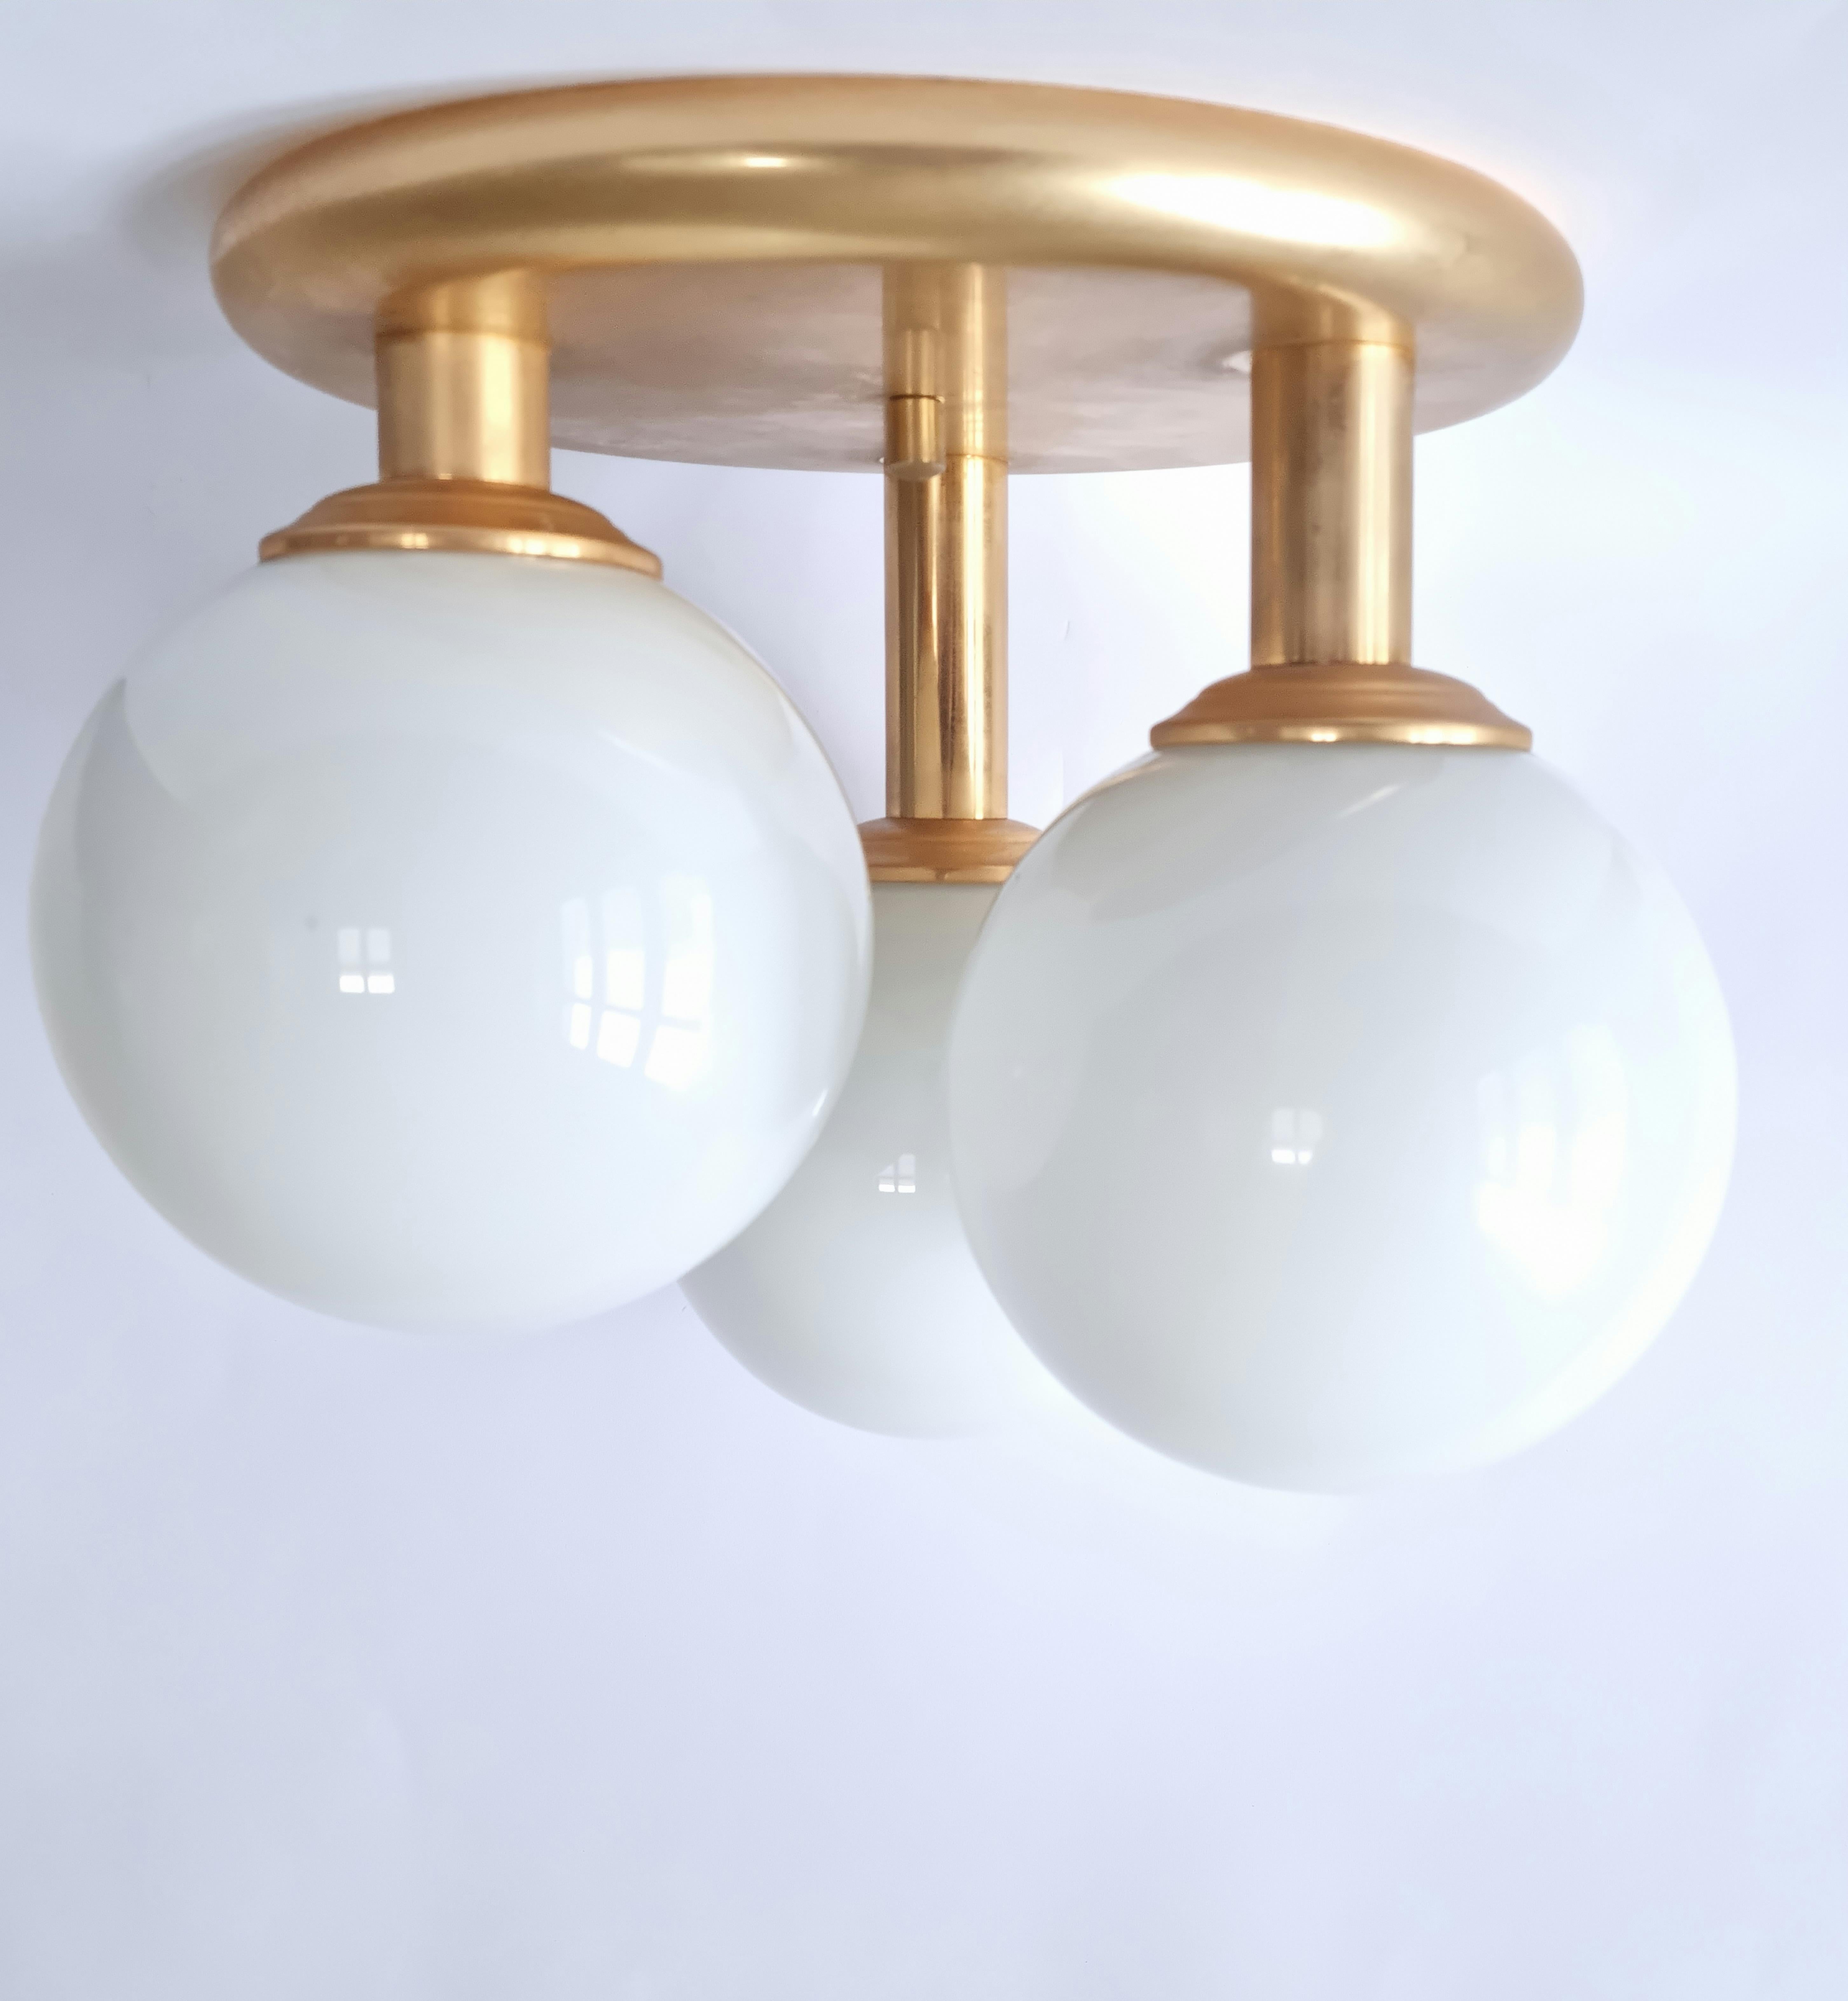 Pair of Midcentury Flush Mount Ceiling or Wall Lamps, Germany, 1970s For Sale 12